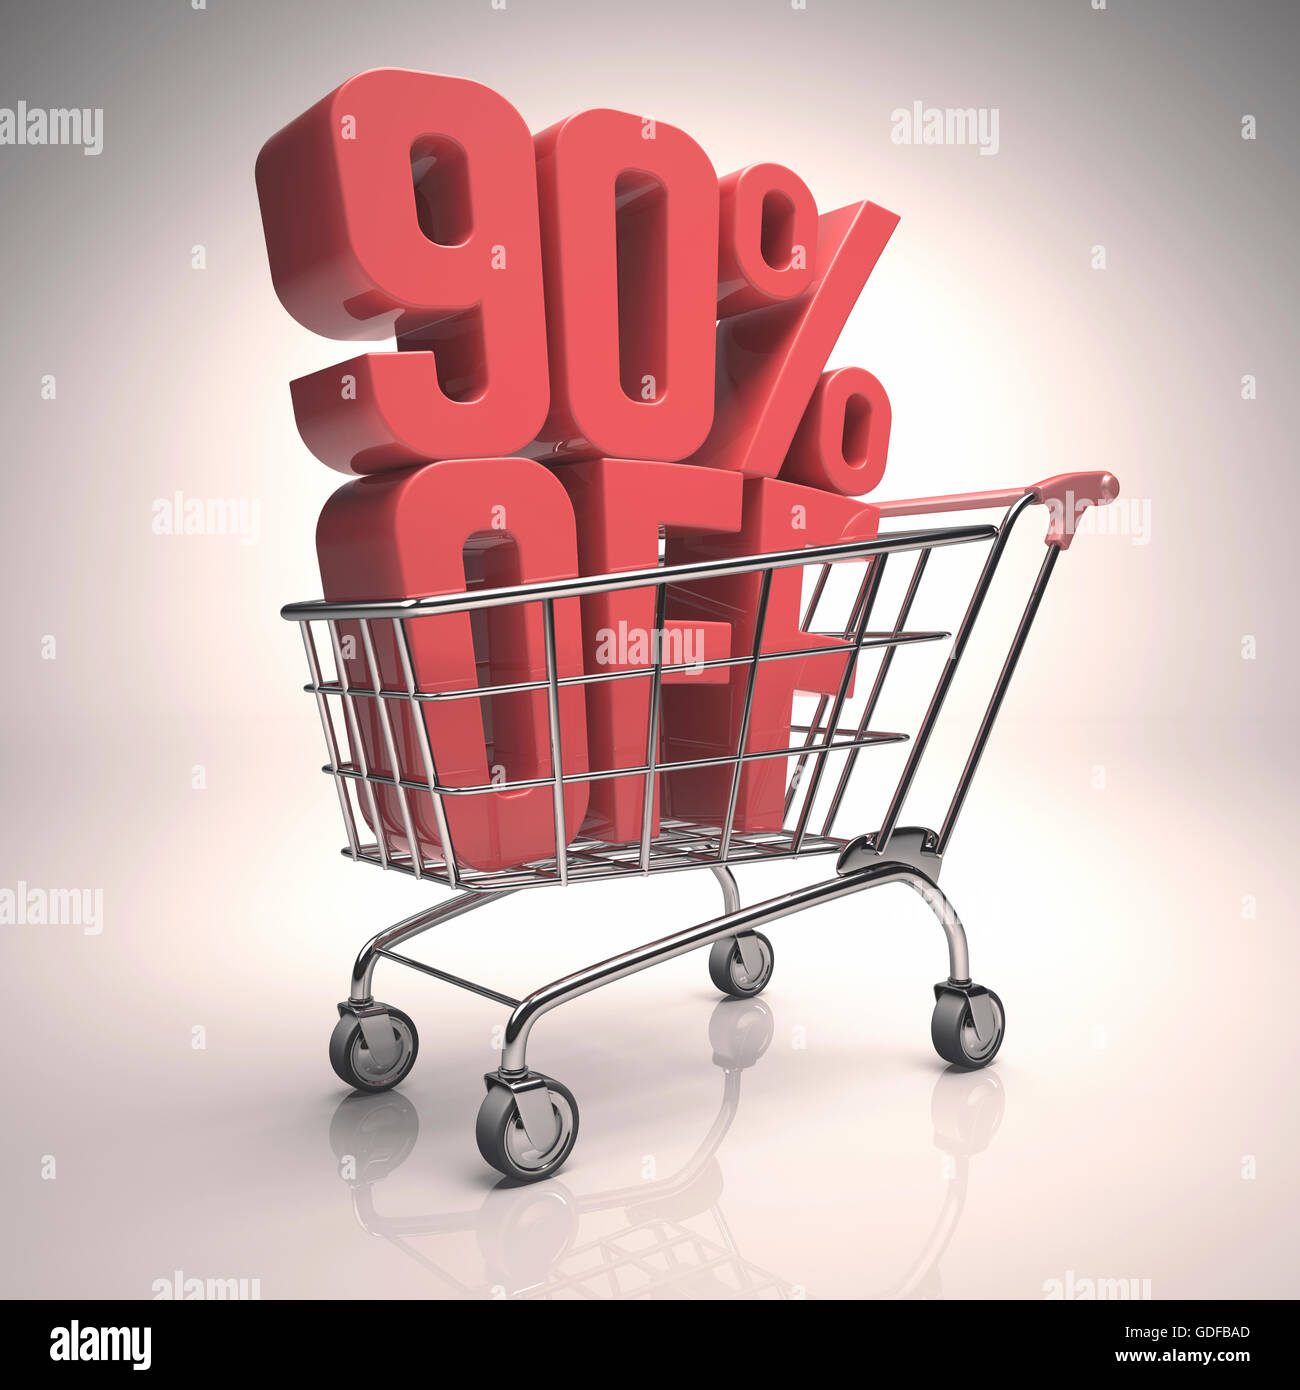 Shopping trolley with 90 per cent off sign, illustration. Stock Photo